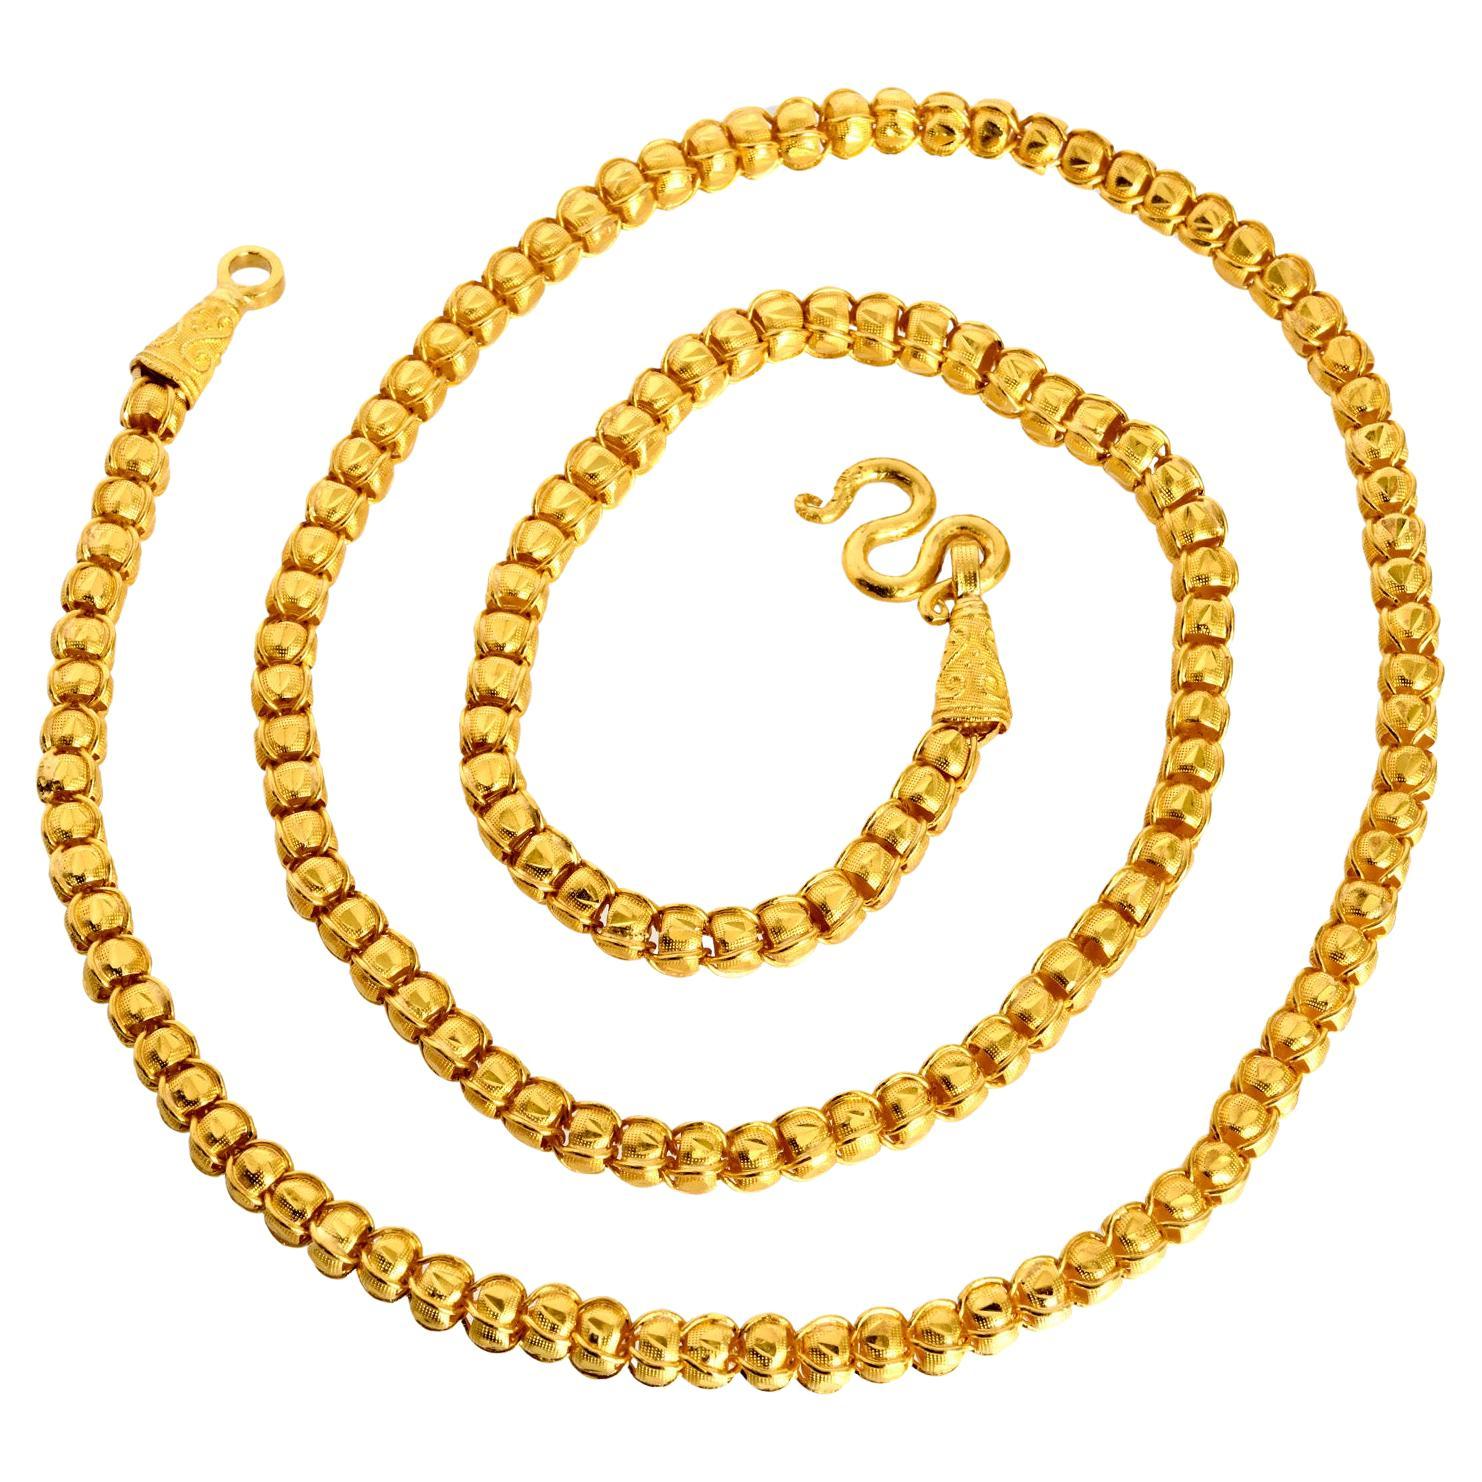 Heavy  79 Grams 22K Gold Engraved Beaded Link Long Necklace For Sale